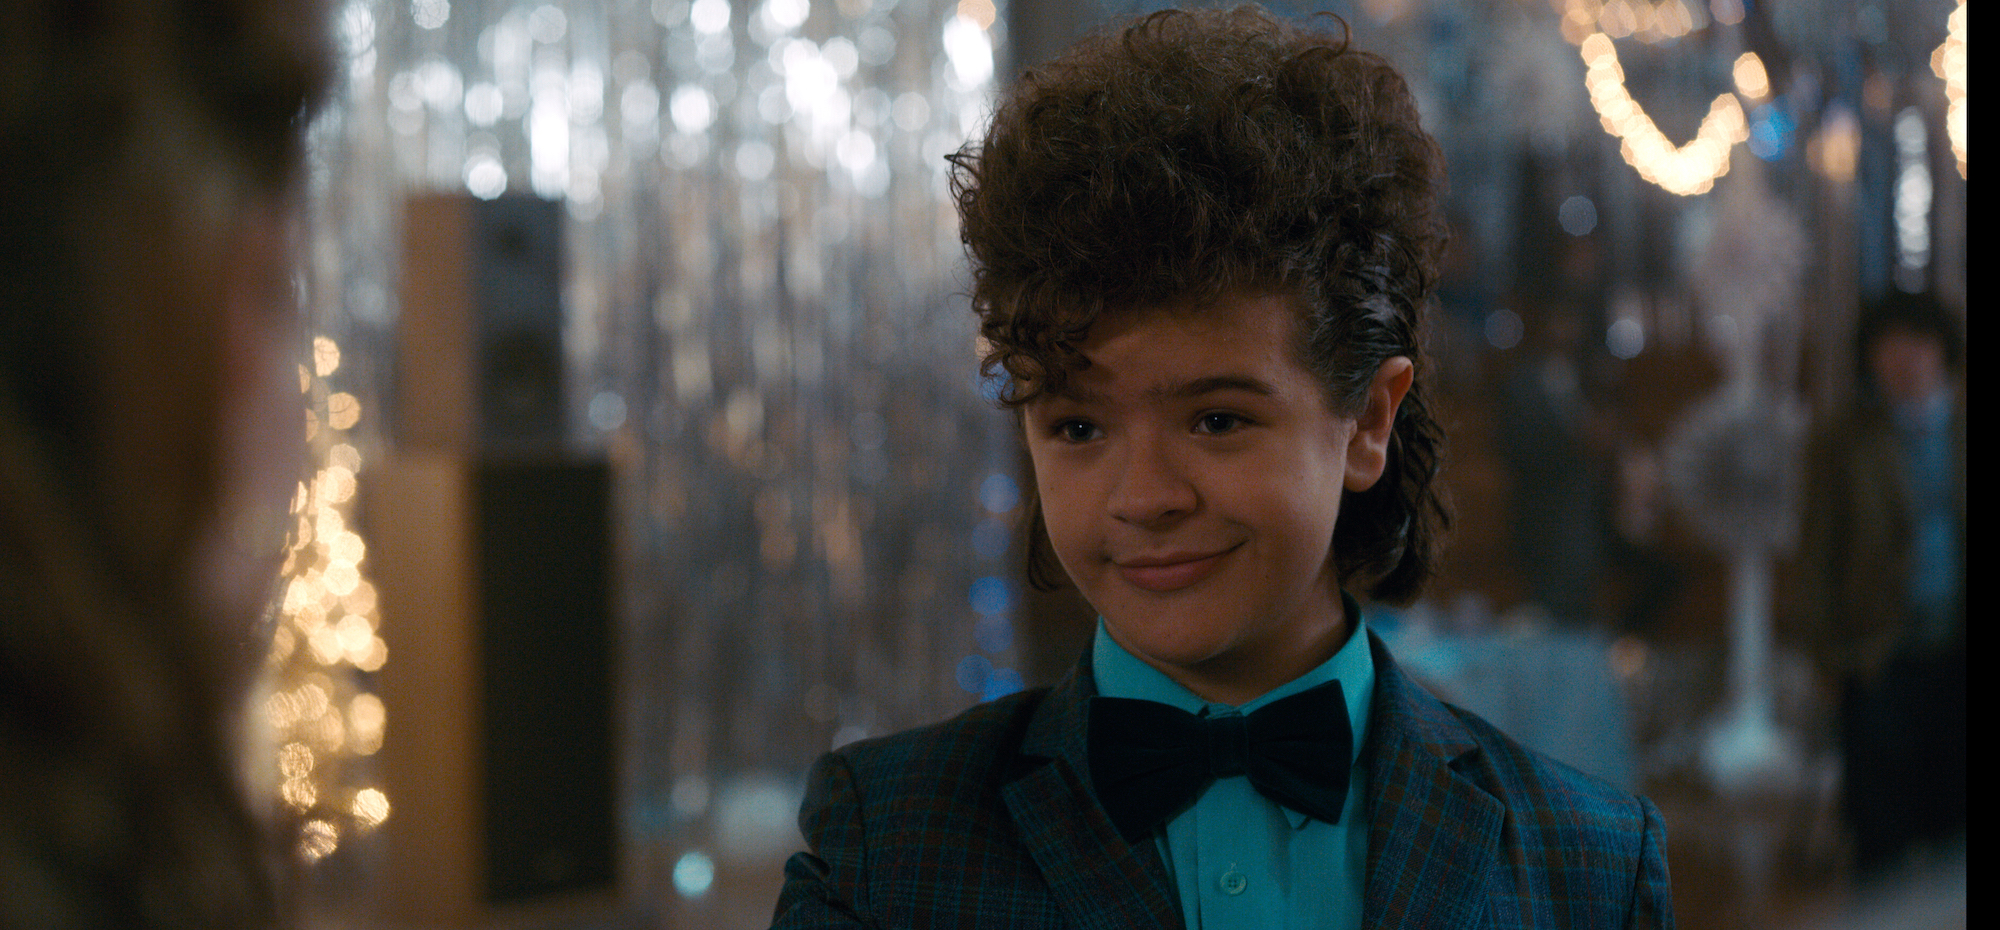 'Stranger Things' star Gaten Matarazzo wearing a blue suit in a production still from season 2